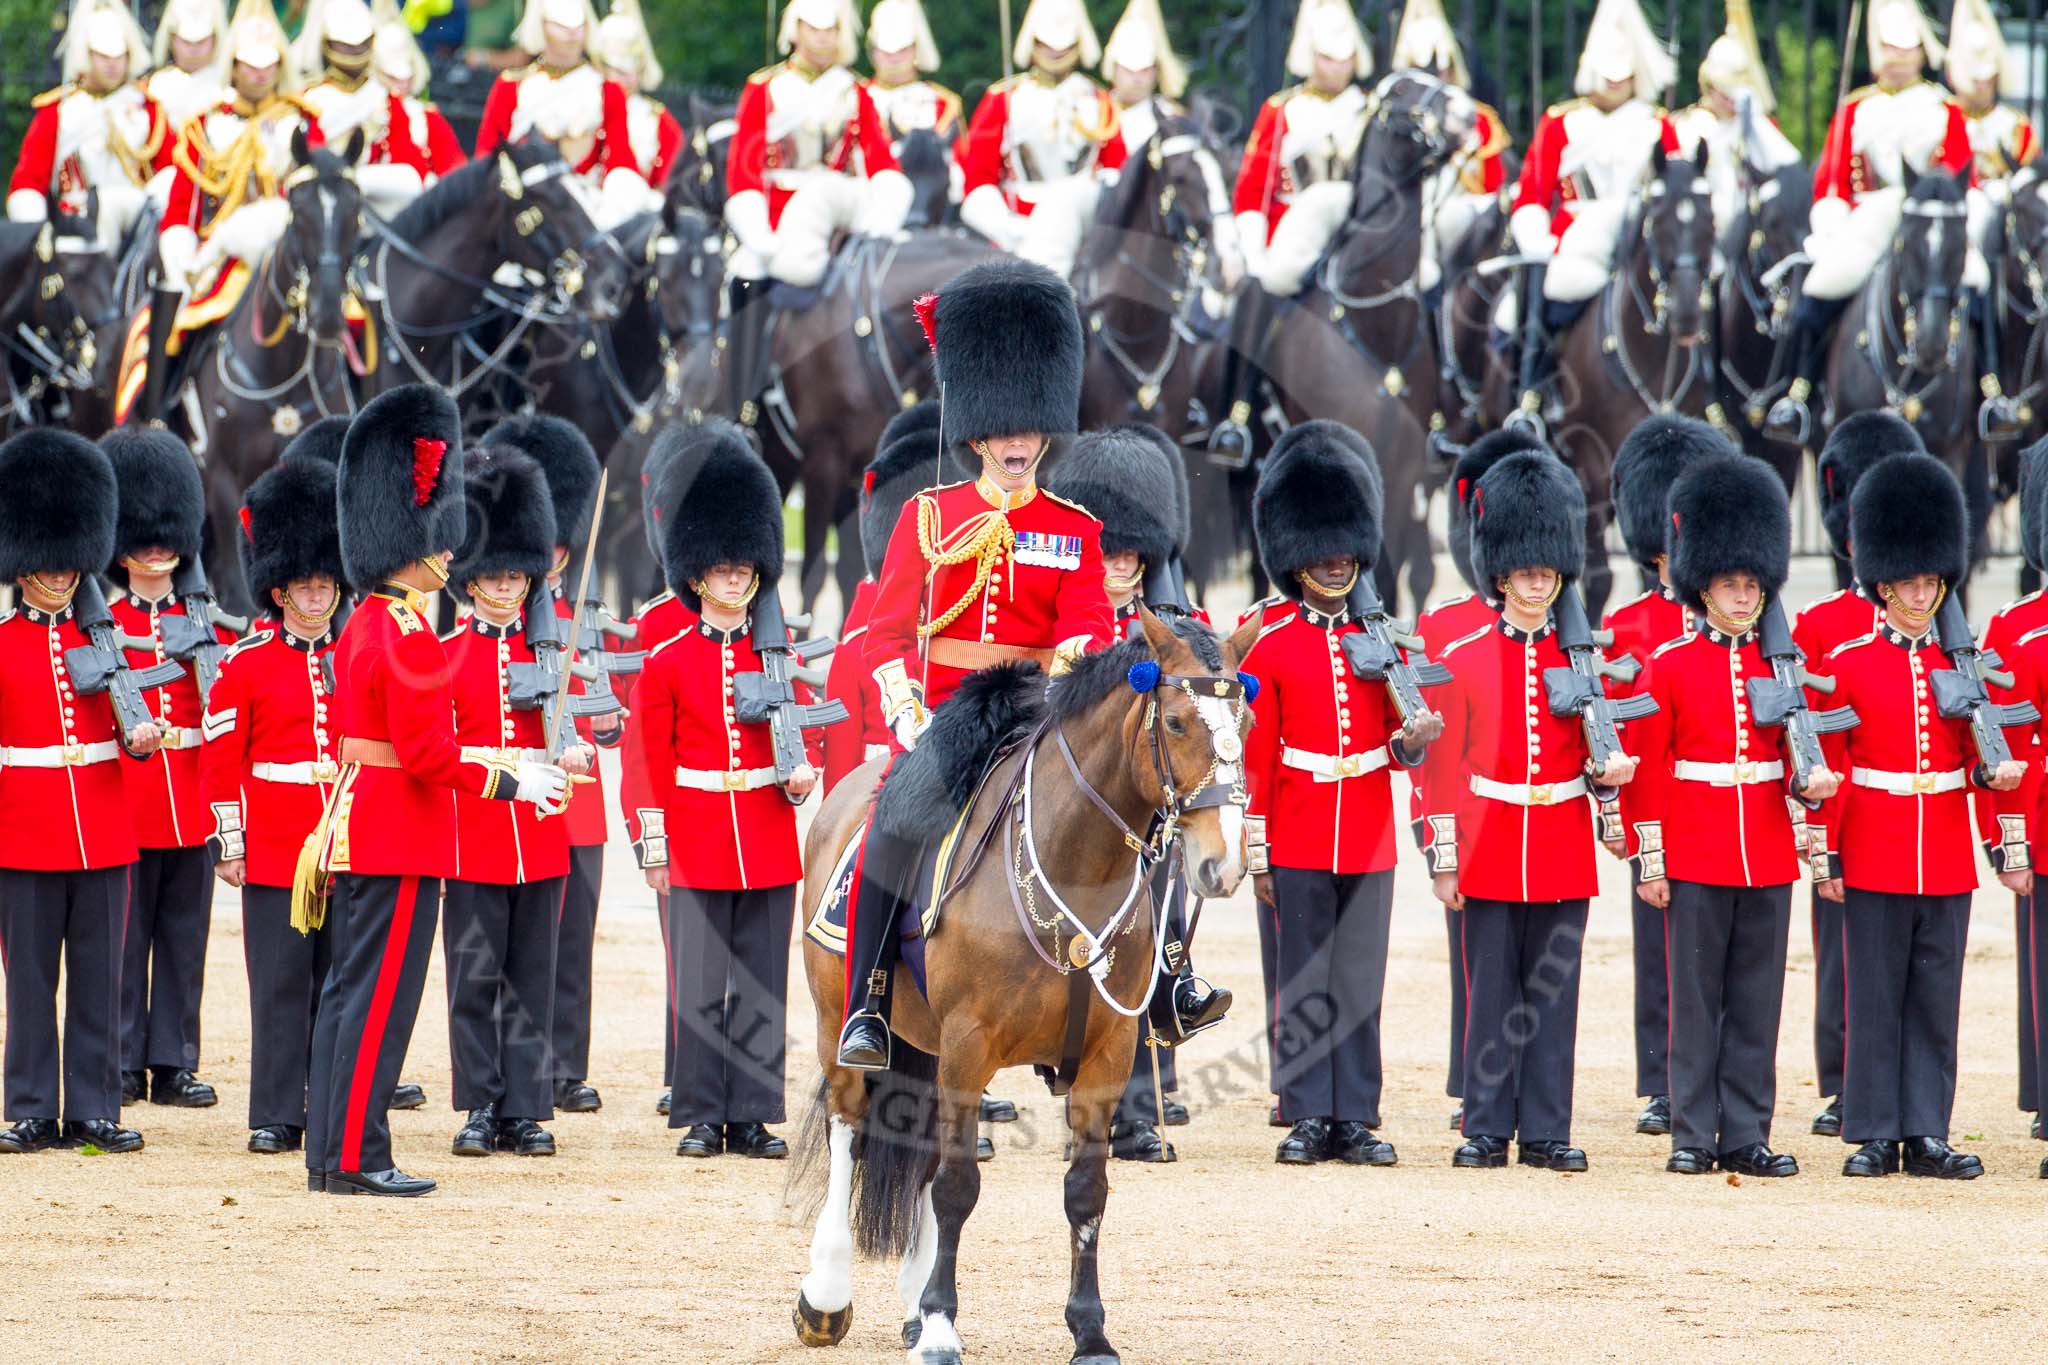 Trooping the Colour 2012: With the "trooping" phase of the parade now over, the Field Officer gives the command for the guards to form divisions..
Horse Guards Parade, Westminster,
London SW1,

United Kingdom,
on 16 June 2012 at 11:29, image #362